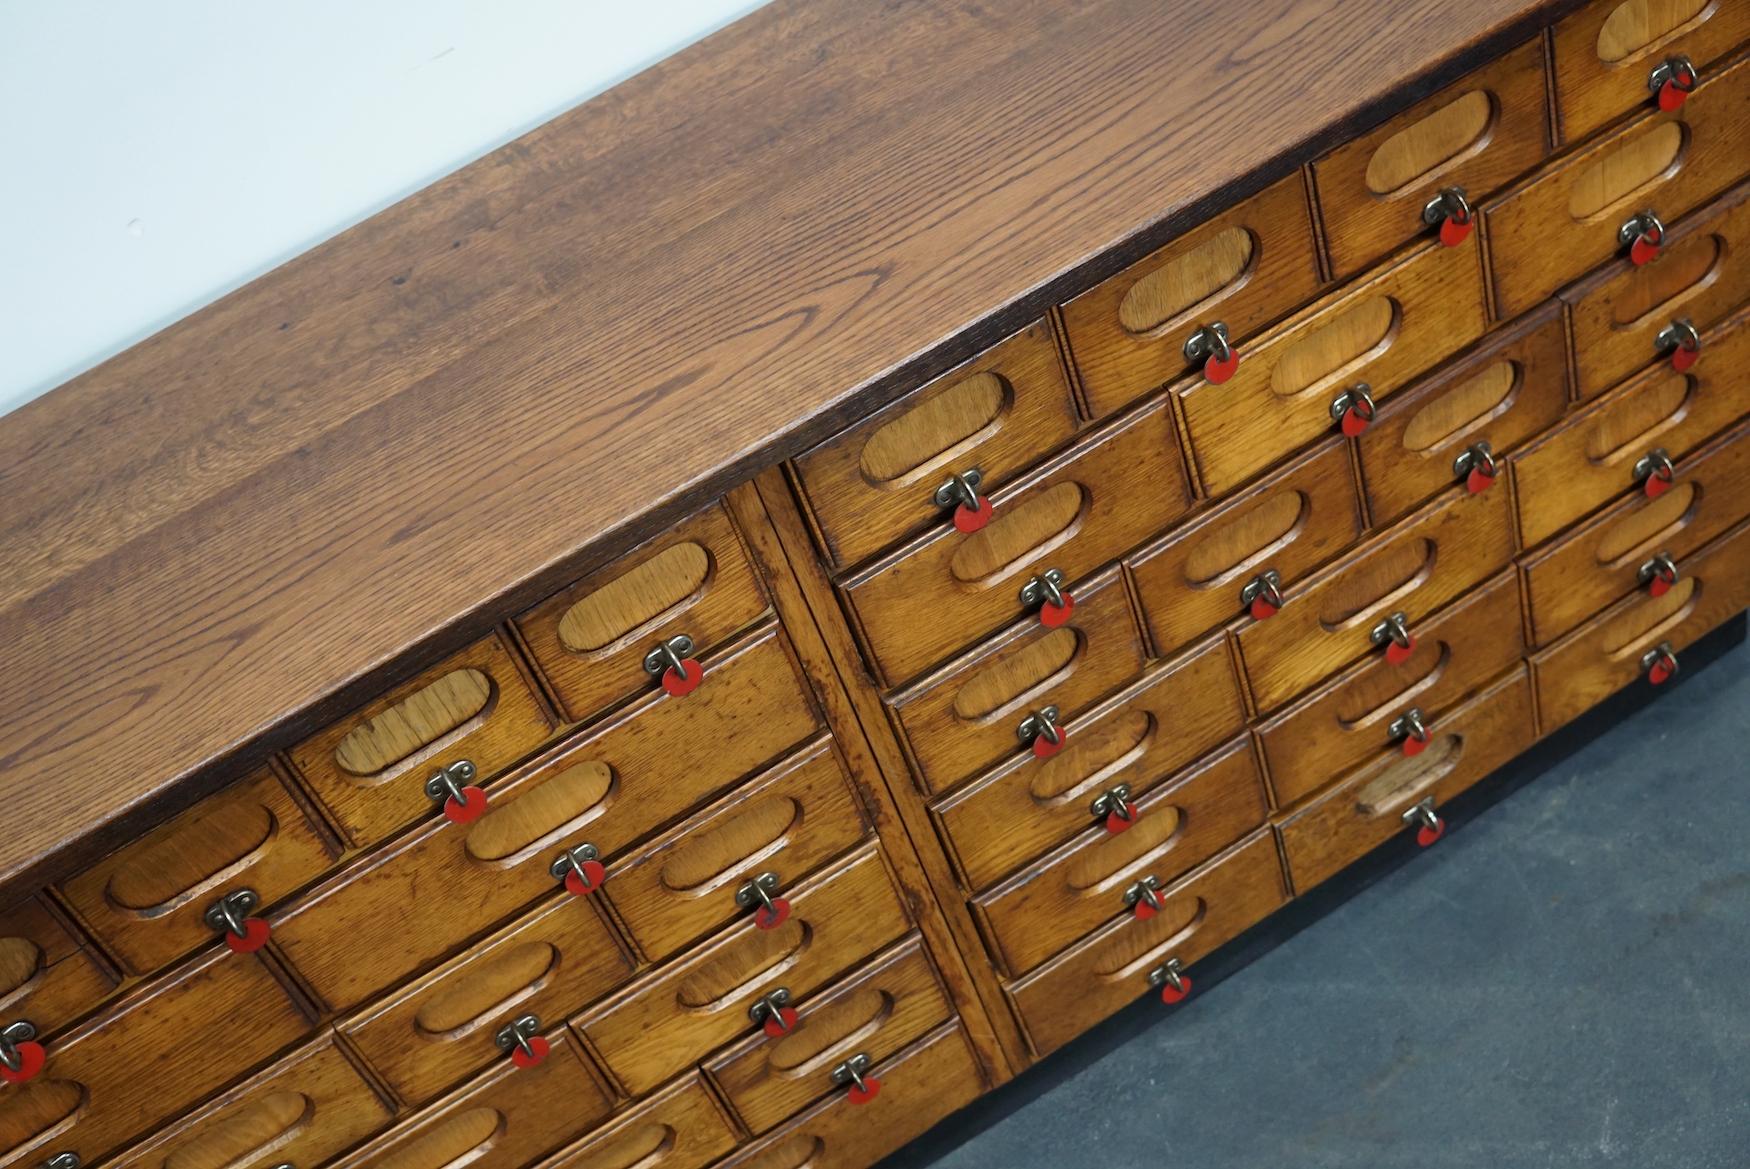 German Industrial Oak and Pine Apothecary Cabinet, Mid-20th Century 1